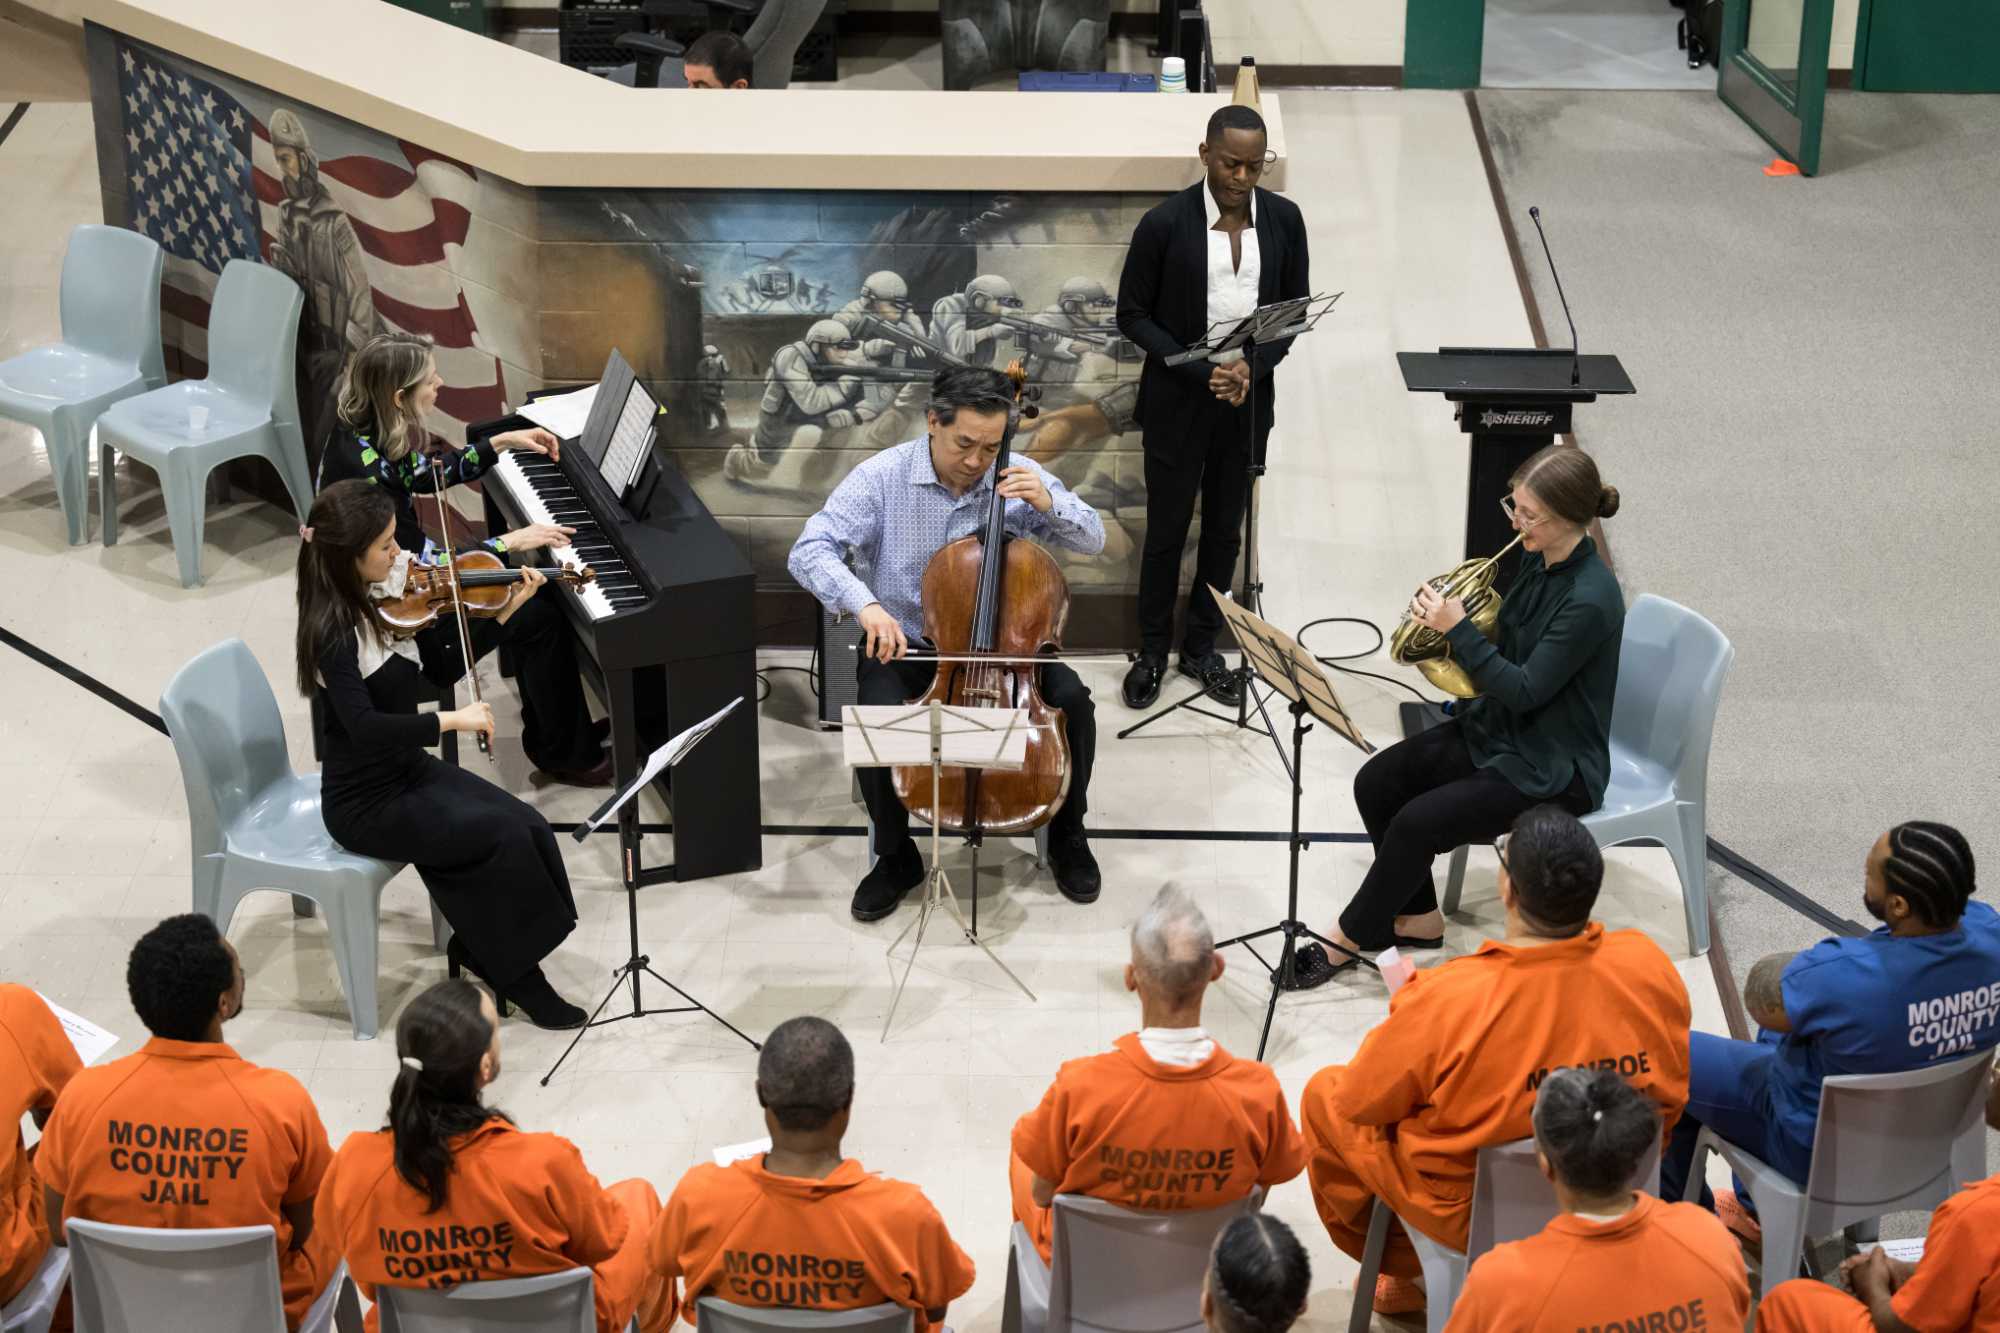 ROC City Concert musicians play their classical music instruments for incarcerated people who are seen from behind.